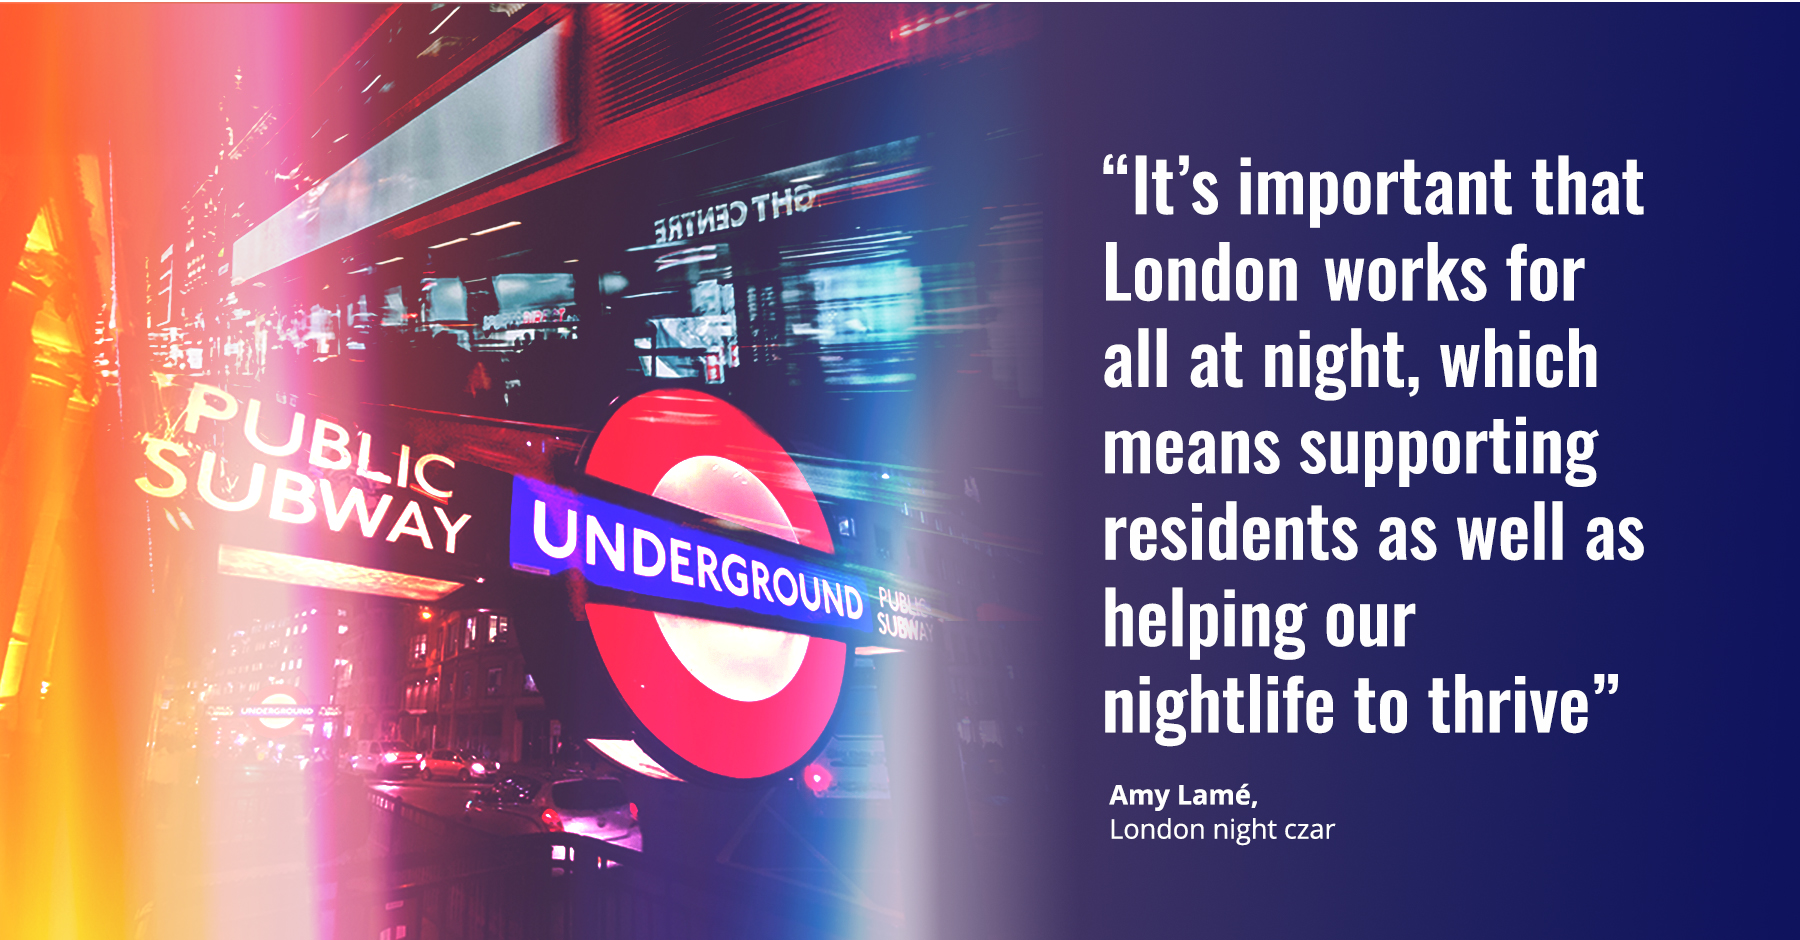 Collage of London Underground sign and bus with quote